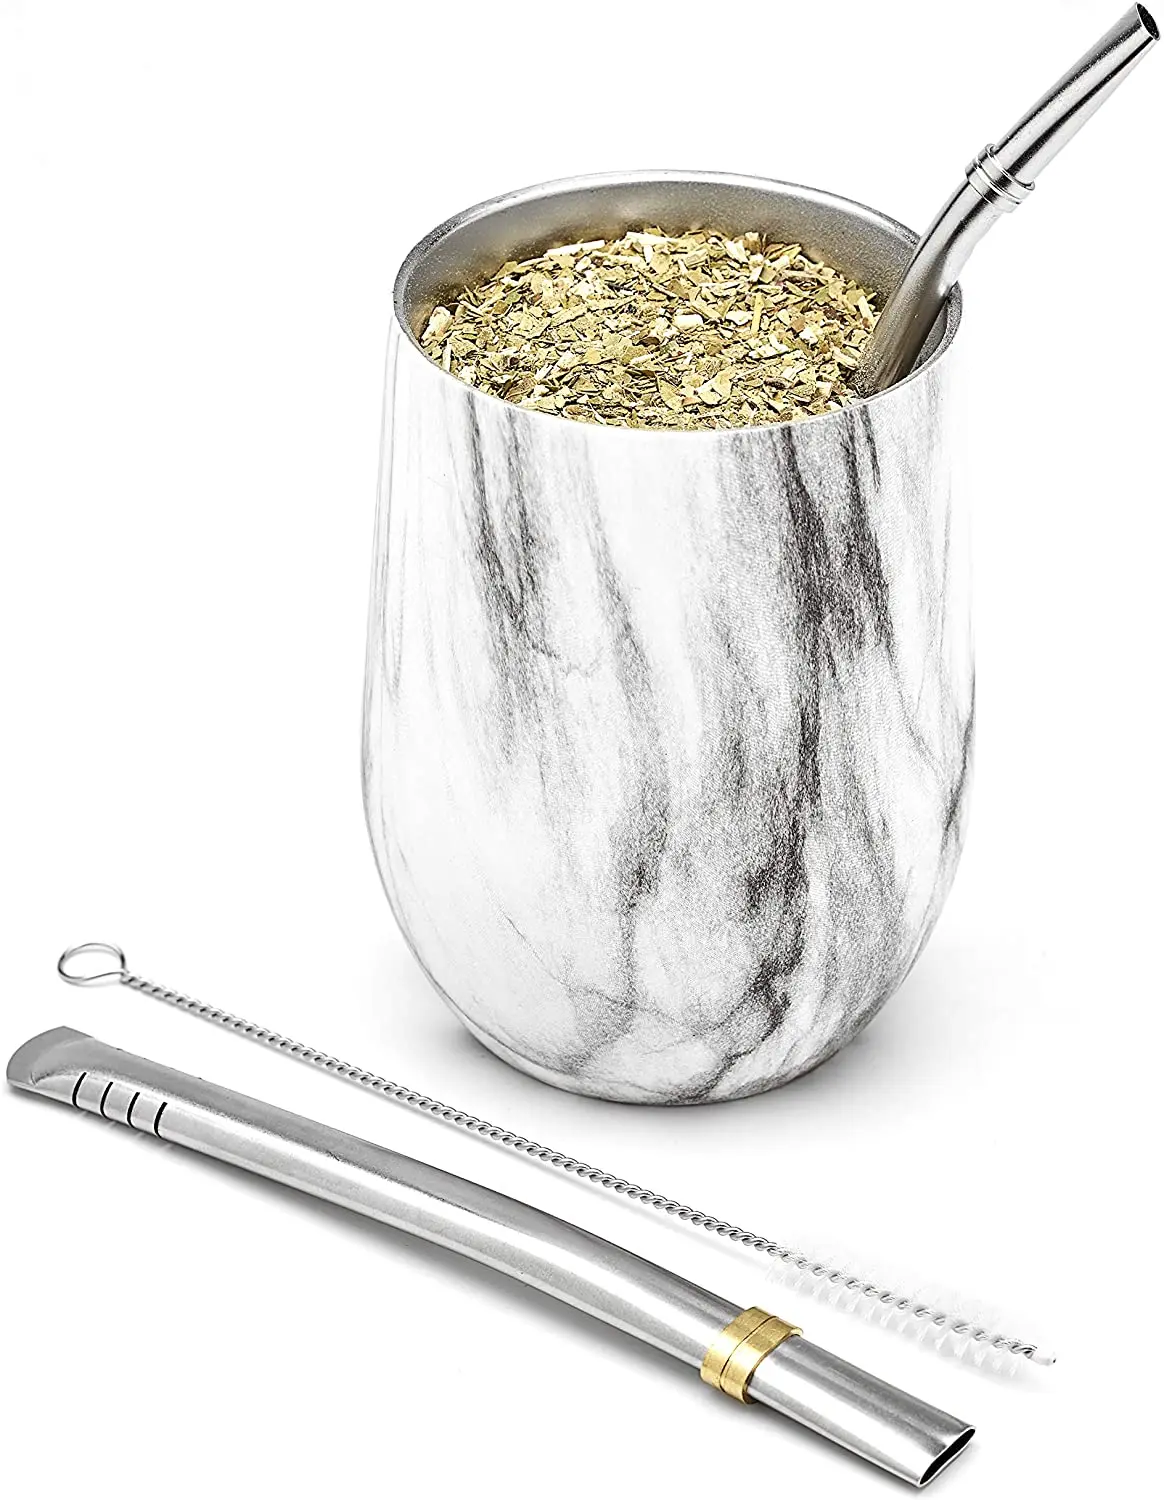 Modern Mate Cup and Bombilla Set (Yerba Mate Cup) -Yerba Mate Set Double Walled 18/8 Stainless Steel